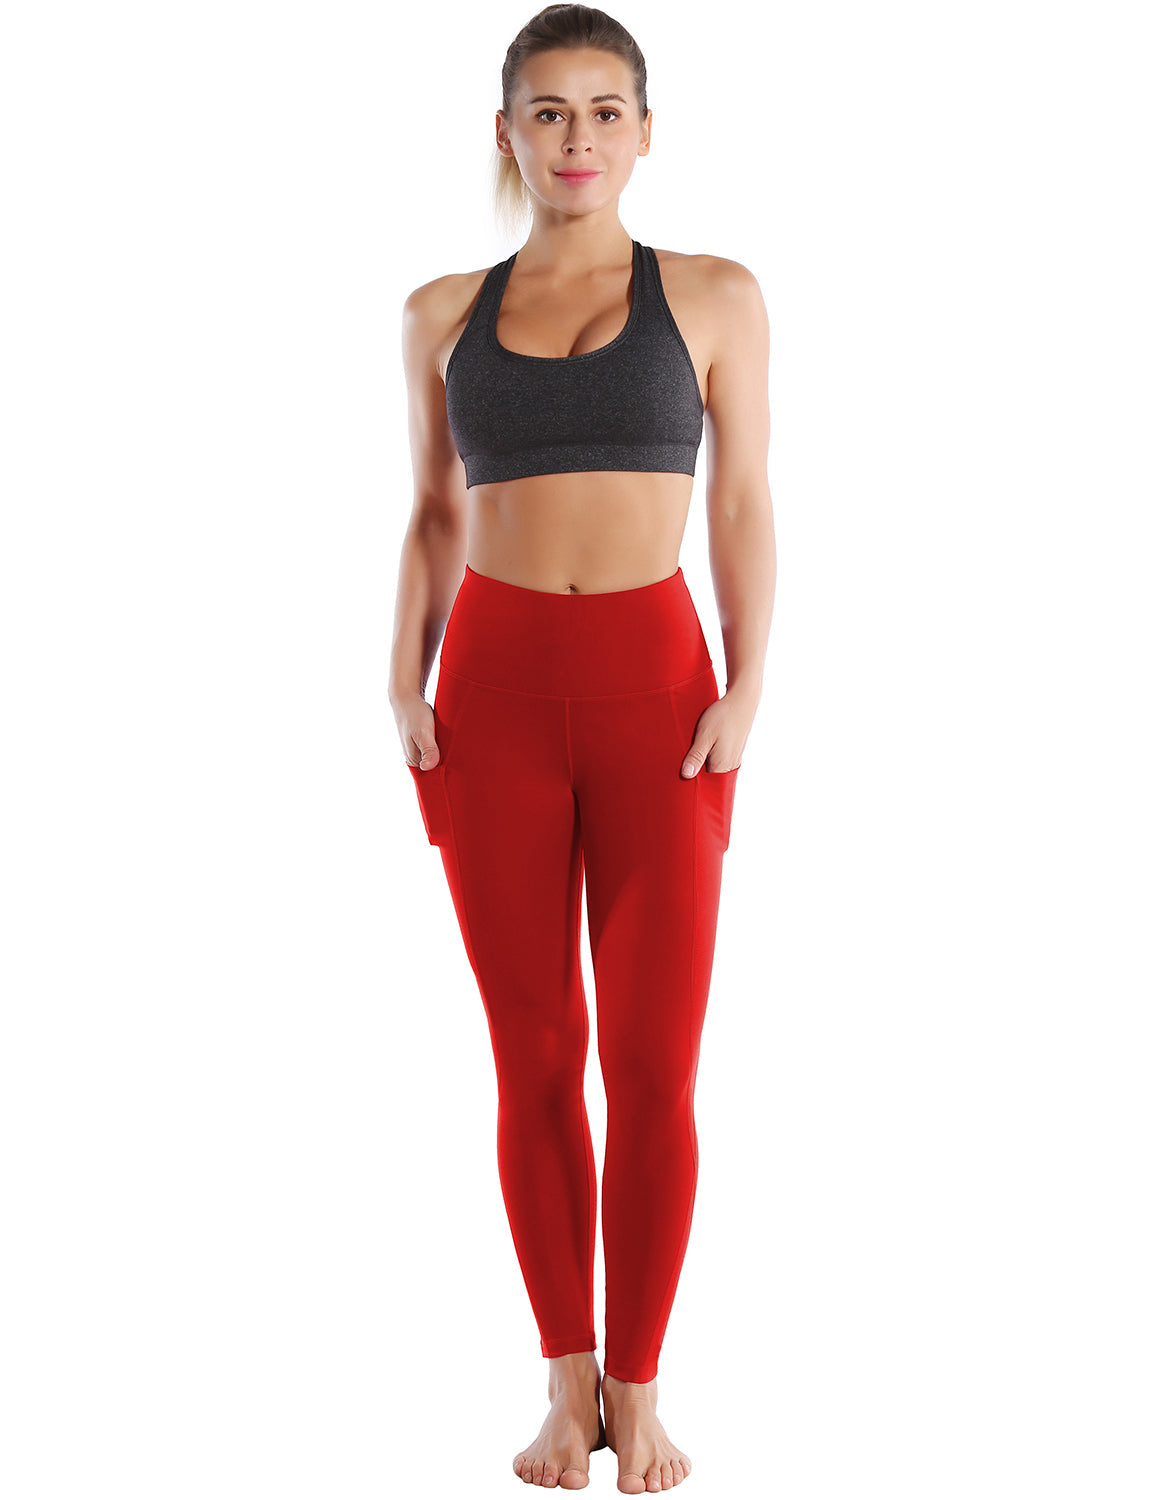 High Waist Side Pockets Gym Pants scarlet 75% Nylon, 25% Spandex Fabric doesn't attract lint easily 4-way stretch No see-through Moisture-wicking Tummy control Inner pocket